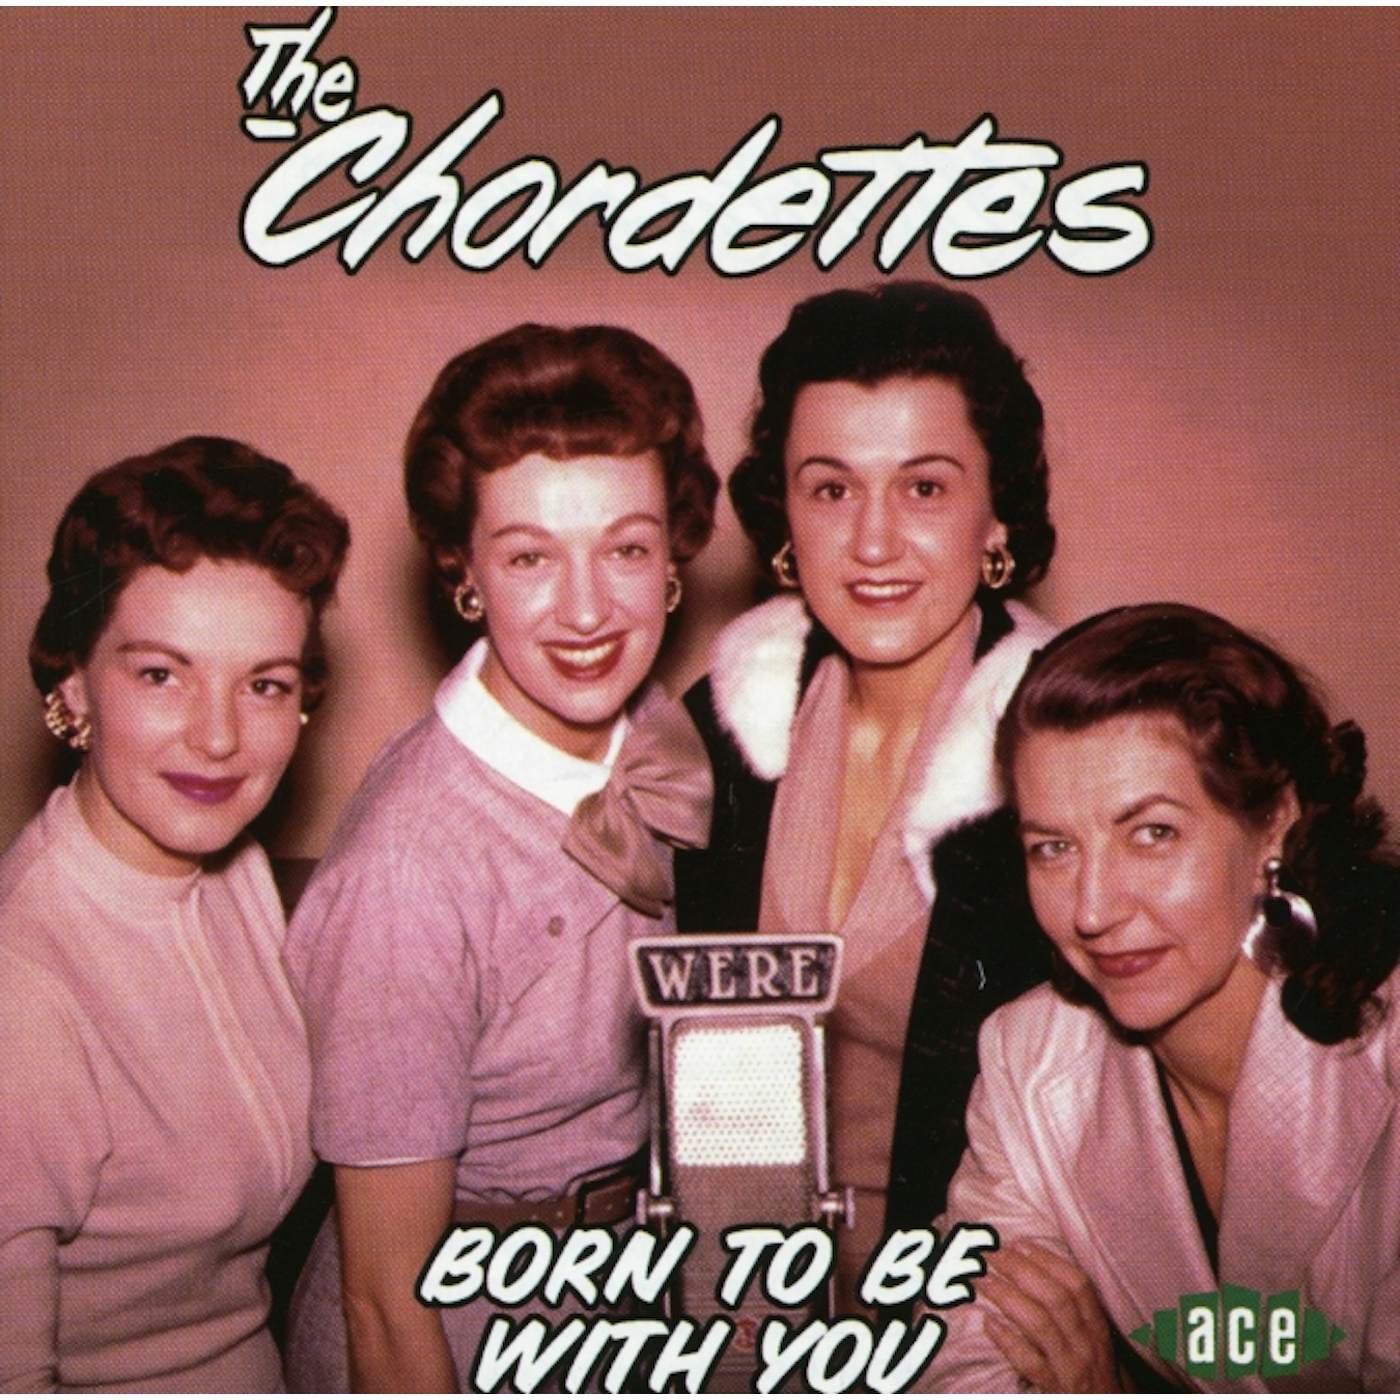 The Chordettes BORN TO BE WITH YOU CD